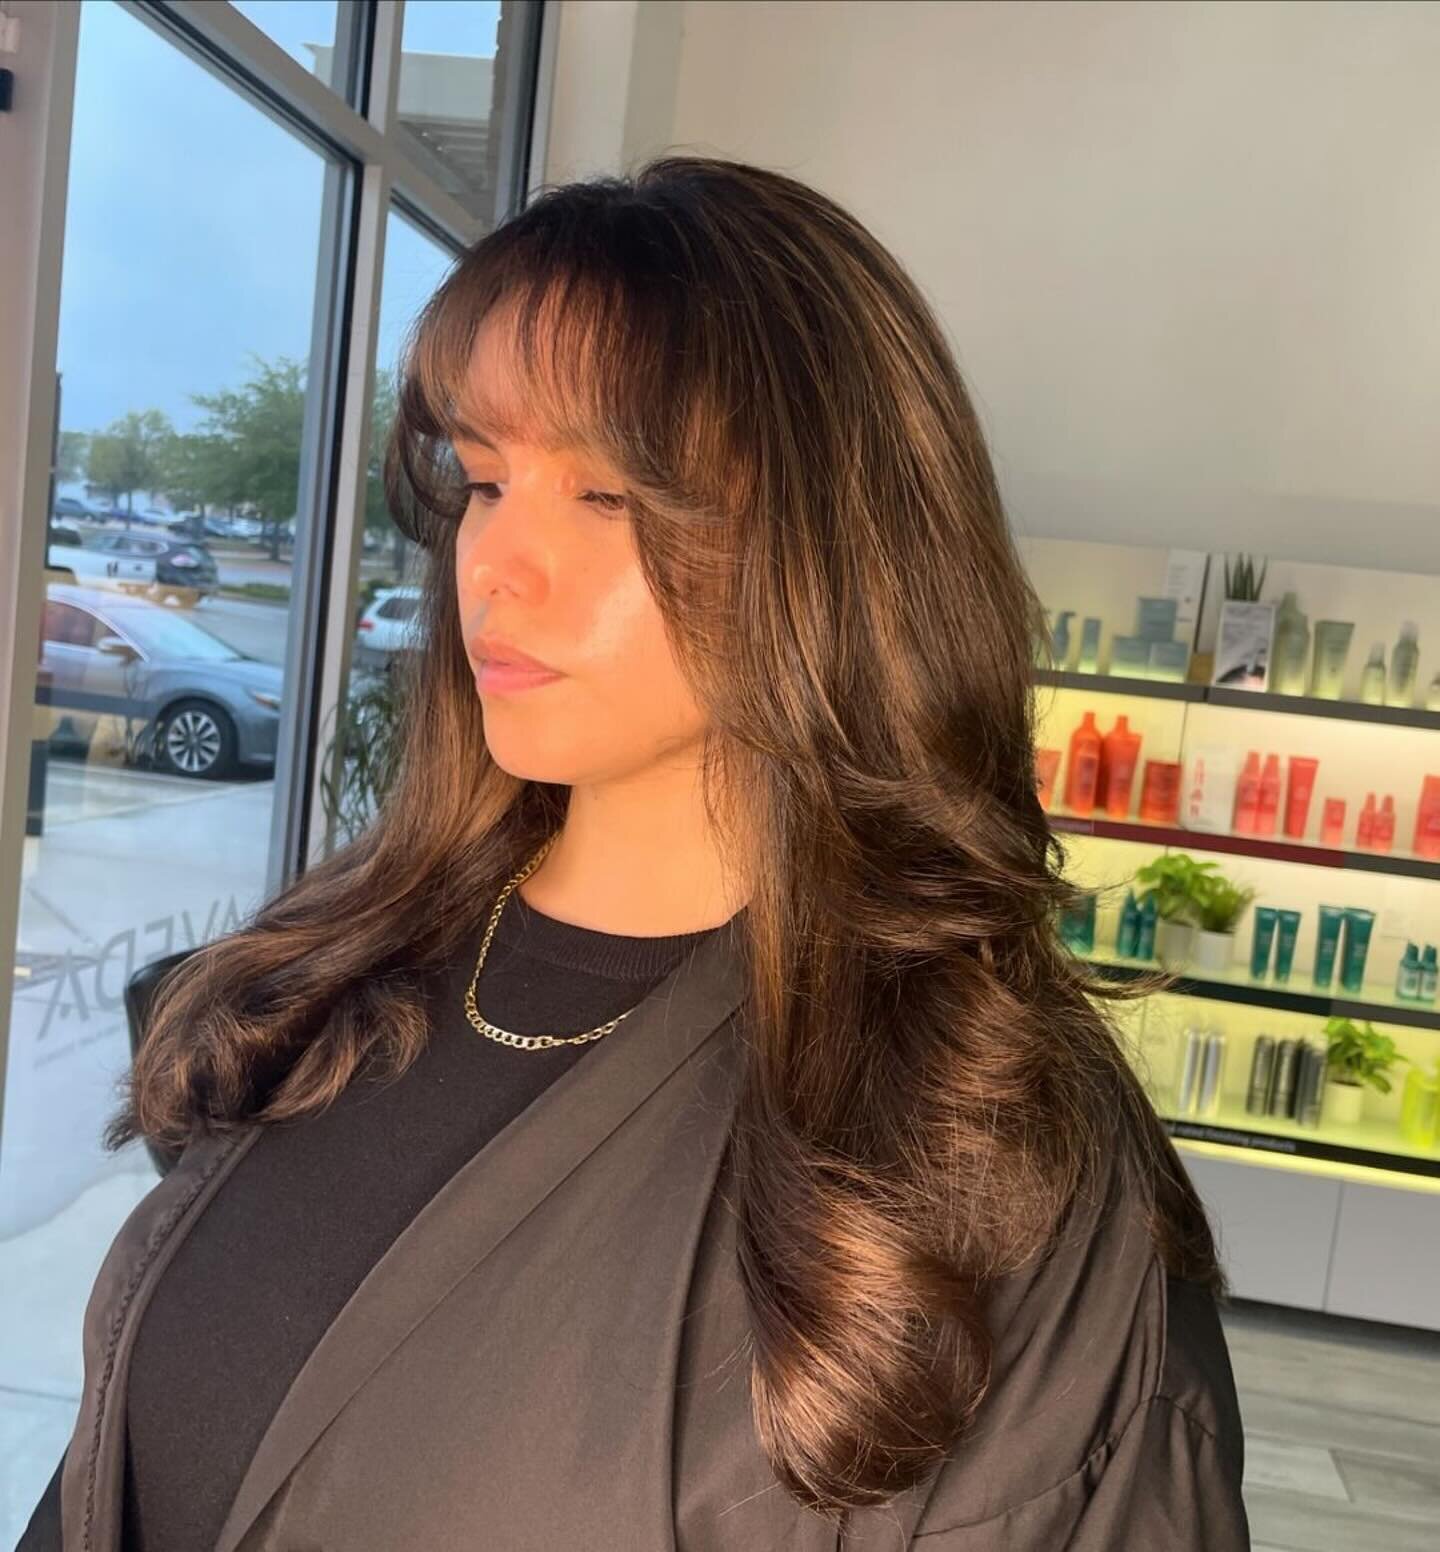 this color &amp; cut &gt;&gt;&gt;&gt; 🤎🤎🤎

#fortworthhair #fortworthhairstylist #avedacolor #avedaartist #dfwhair #dfwhaircolorist #fortworthhairsalon #kellerhairstylist #kellerhairsalon @aveda @neill @avedaartists